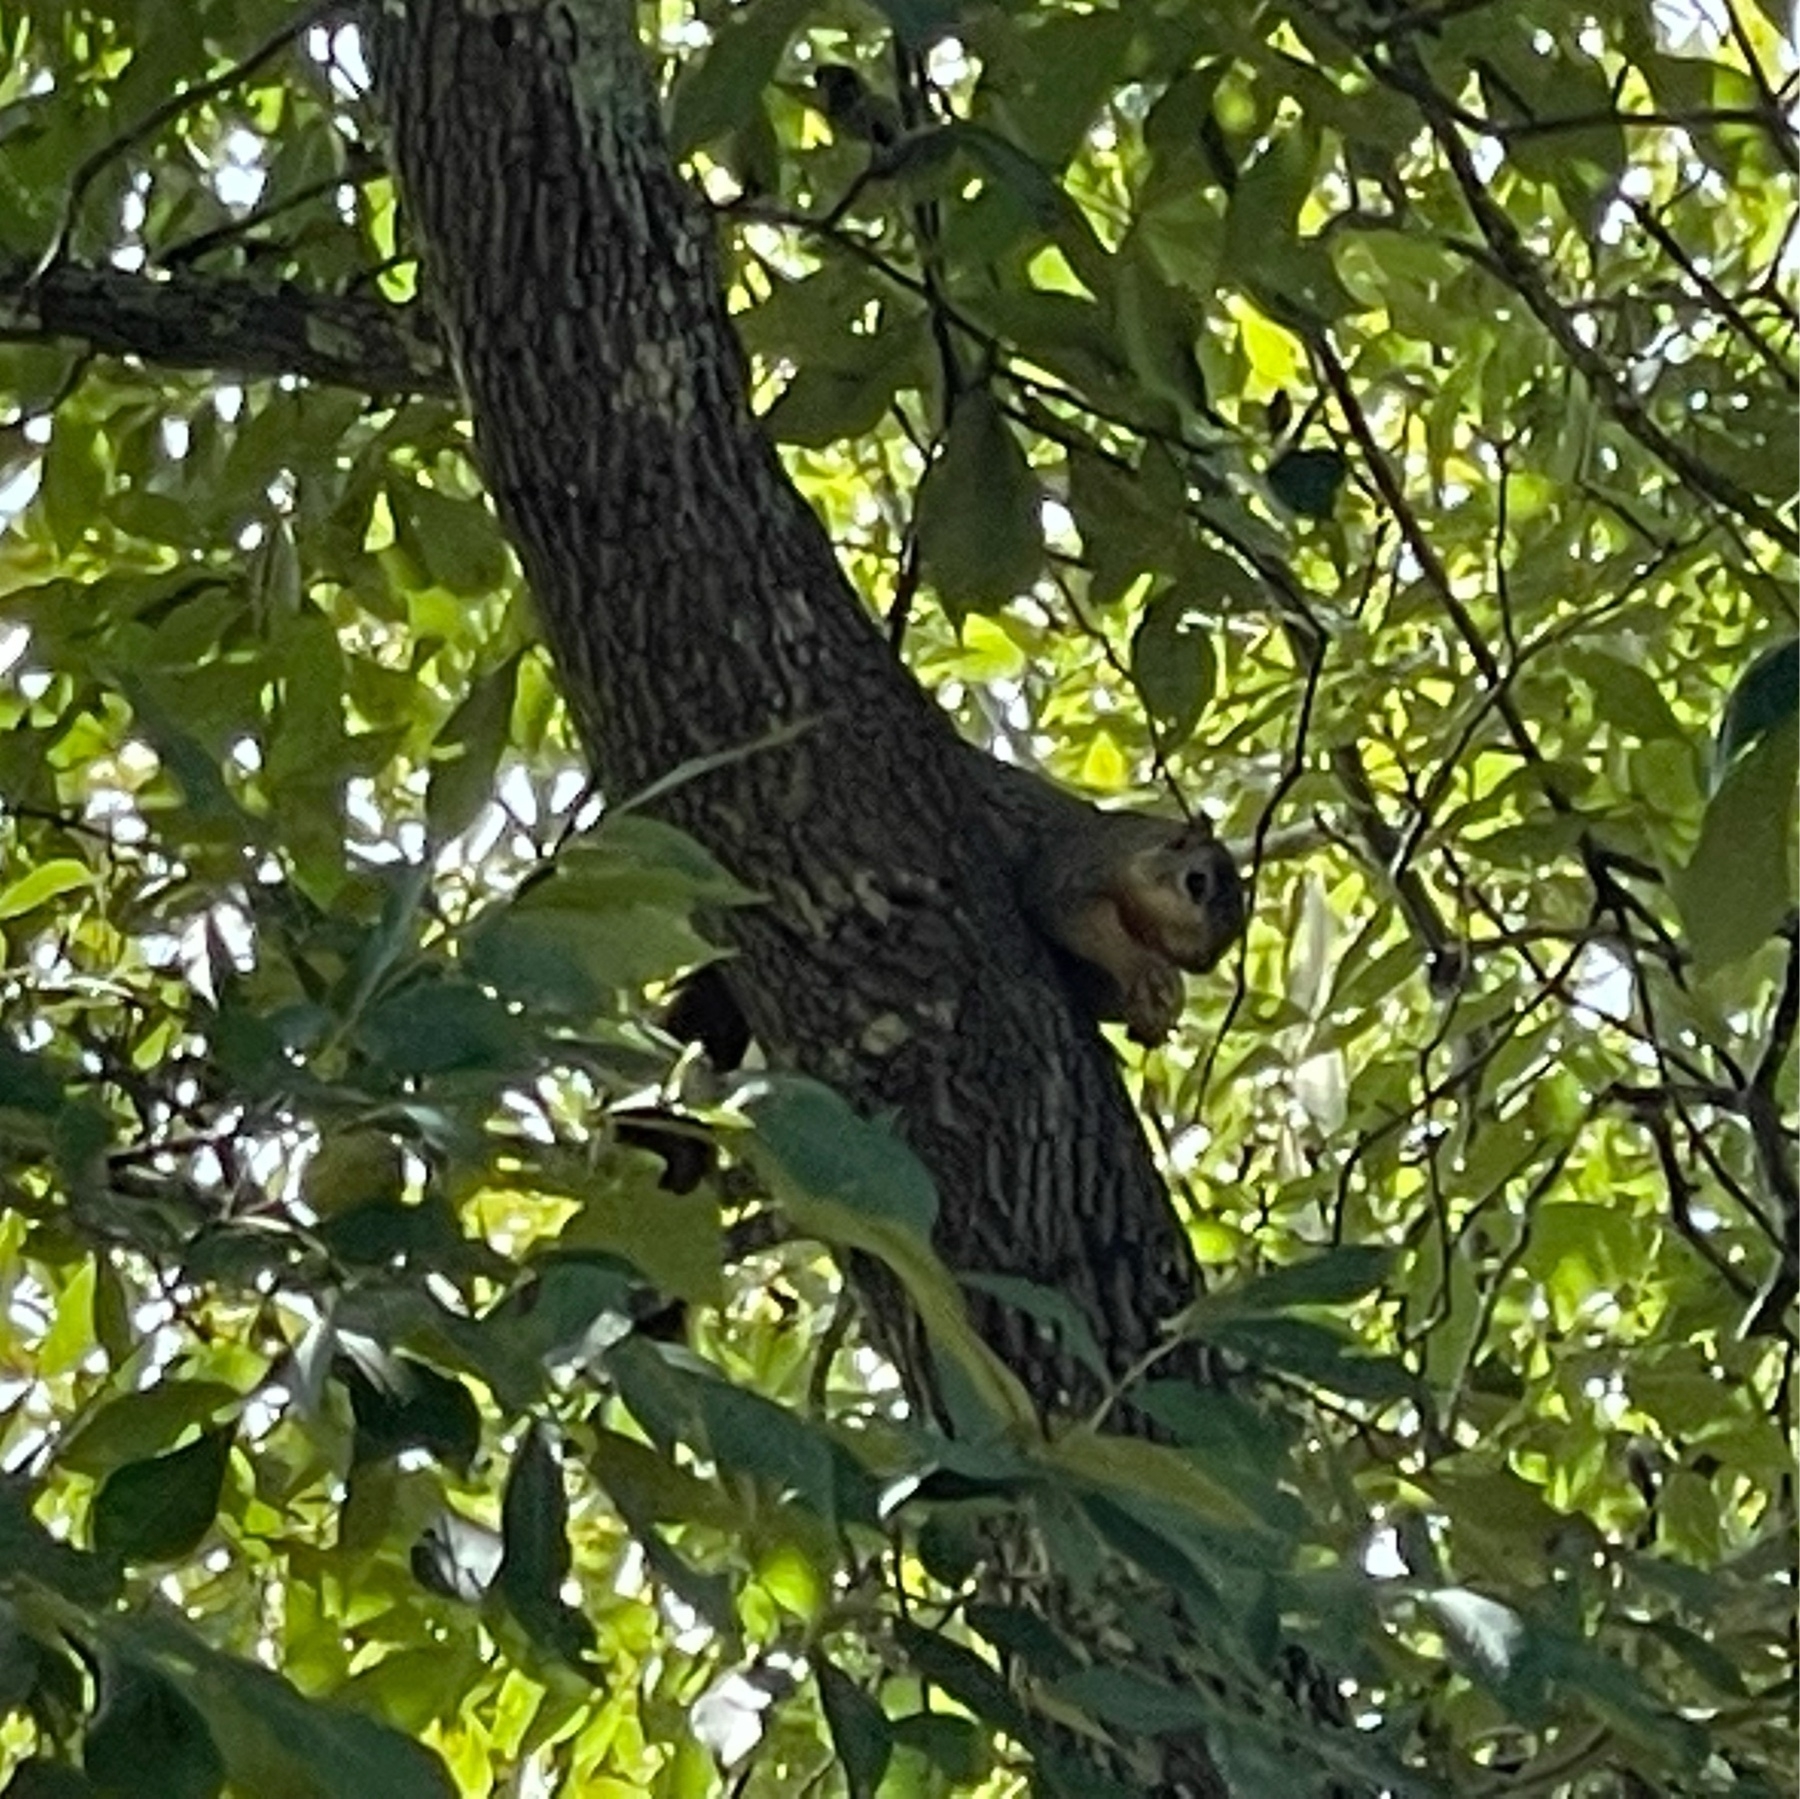 Snacking squirrel in tree 